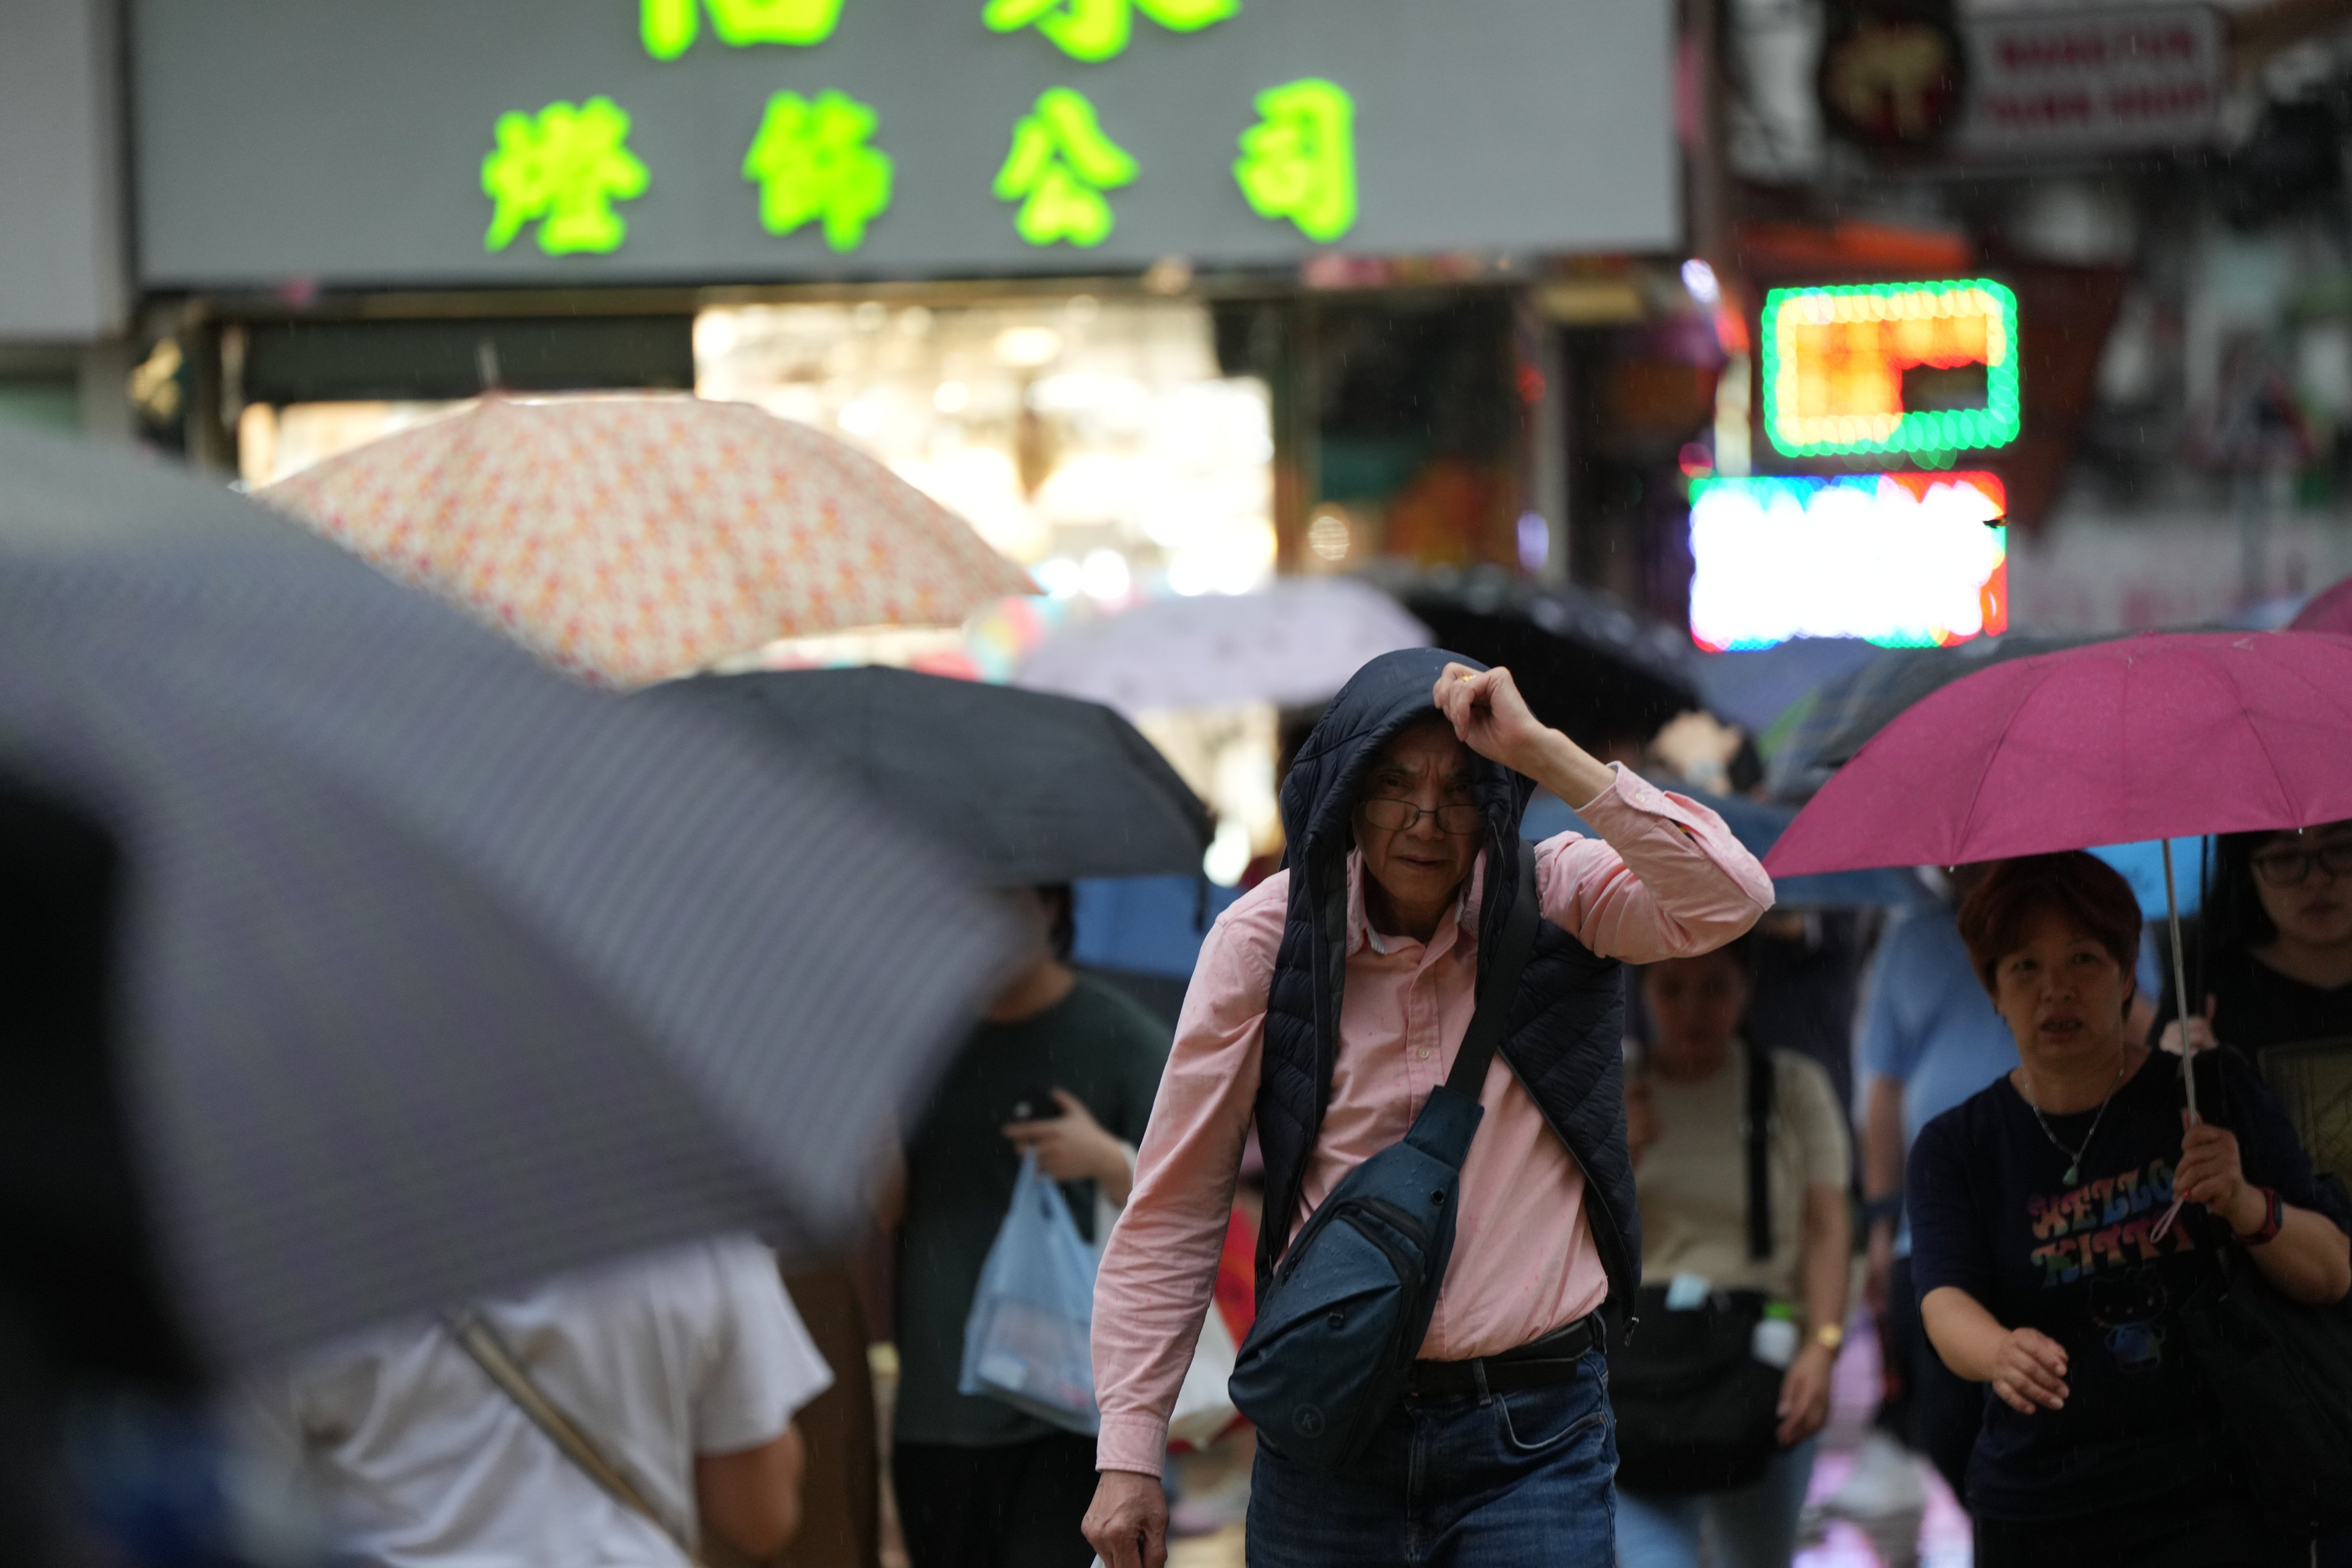 Thunderstorms are predicted for Sunday and Monday nights, as well as eight straight days of rain. Photo: Sam Tsang